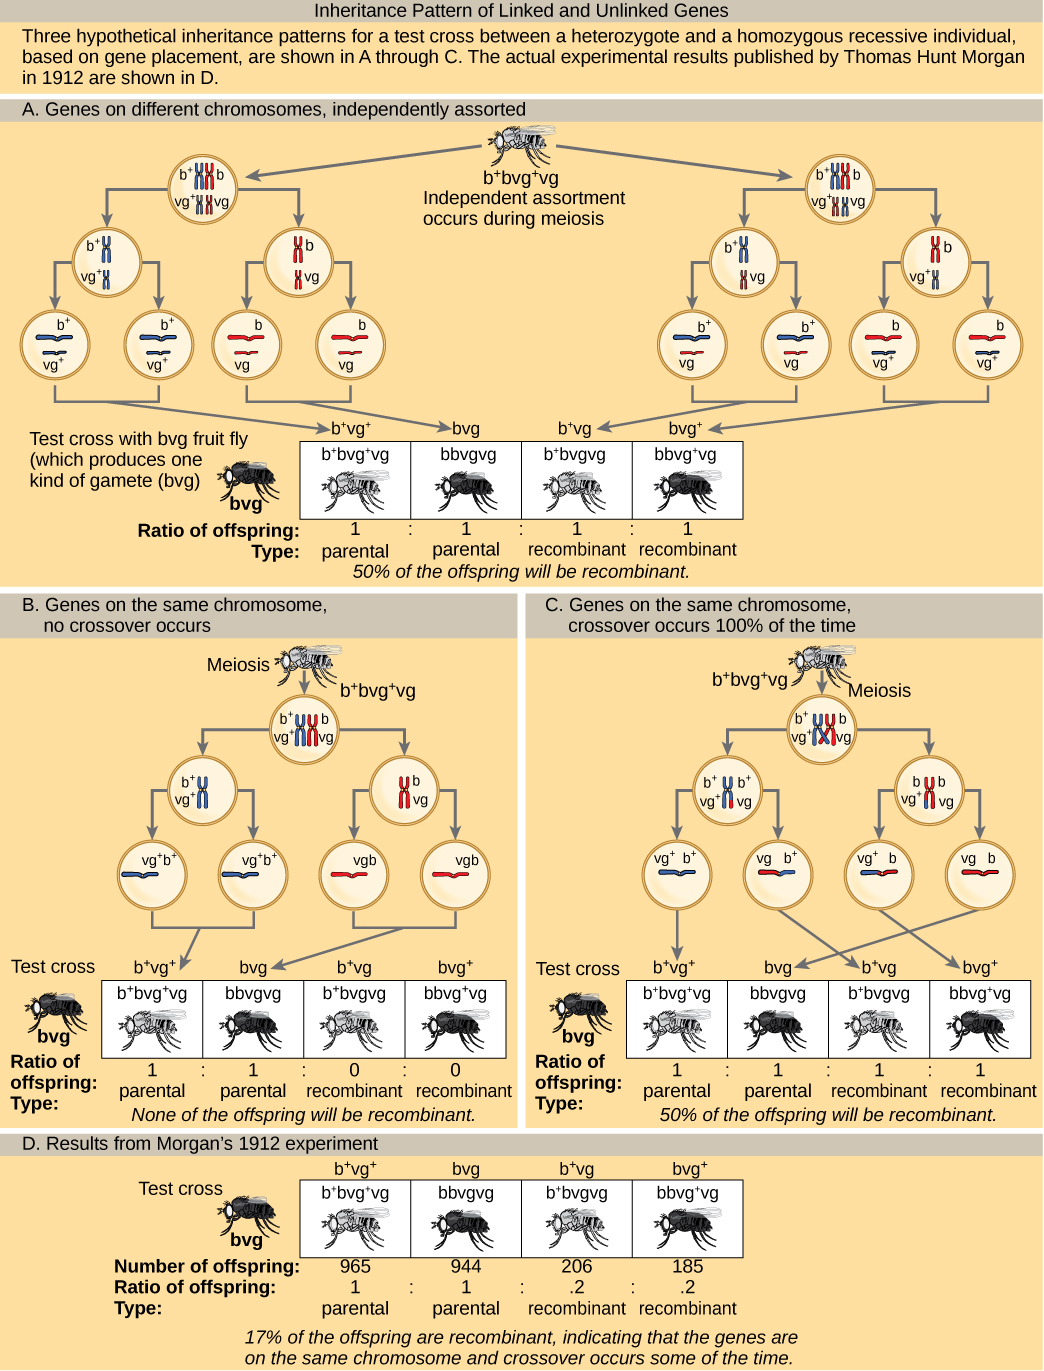 The illustration shows the possible inheritance patterns of linked and unlinked genes. The example used includes fruit fly body color and wing length. Fruit flies may have a dominant gray color lowercase b superscript +, or a recessive black color lowercase b. They may have dominant long wings lowercase v g superscript +, or recessive short wings, lowercase v g. Three hypothetical inheritance patterns for a test cross between a heterozygous and a recessive fruit fly are shown, based on gene placement. The actual experimental results published by Thomas Hunt Morgan in 1912 are also shown. In the first hypothetical inheritance pattern in part a, the genes for the two characteristics are on different chromosomes. Independent assortment occurs so that the ratio of genotypes in the offspring is 1 b + b v g + v g colon 1. b b v g v g colon 1. b + b v g v g colon 1. v g v g v g + v g, and 50% of the offspring are nonparental types. In the second hypothetical inheritance pattern in part b, the genes are close together on the same chromosome so that no crossover occurs between them. The ratio of genotypes is 1 b + b v g + v g colon 1. b b v g v g, and none of the offspring are recombinant. In the third hypothetical inheritance pattern in part c, the genes are far apart on the same chromosome so that crossing over occurs 100% of the time. The ratio of genotypes is the same as for genes on two different chromosomes, and 50% of the offspring are recombinant, nonparental types. Part d shows that the number of offspring that Thomas Hunt Morgan actually observed was 965 colon 944 colon 206 colon 185, which is b + b v g + v g colon b b v g v g colon b + b v g v g colon, b b v g + v g. Seventeen percent of the offspring were recombinant, indicating that the genes are on the same chromosome and crossing over occurs between them some of the time.